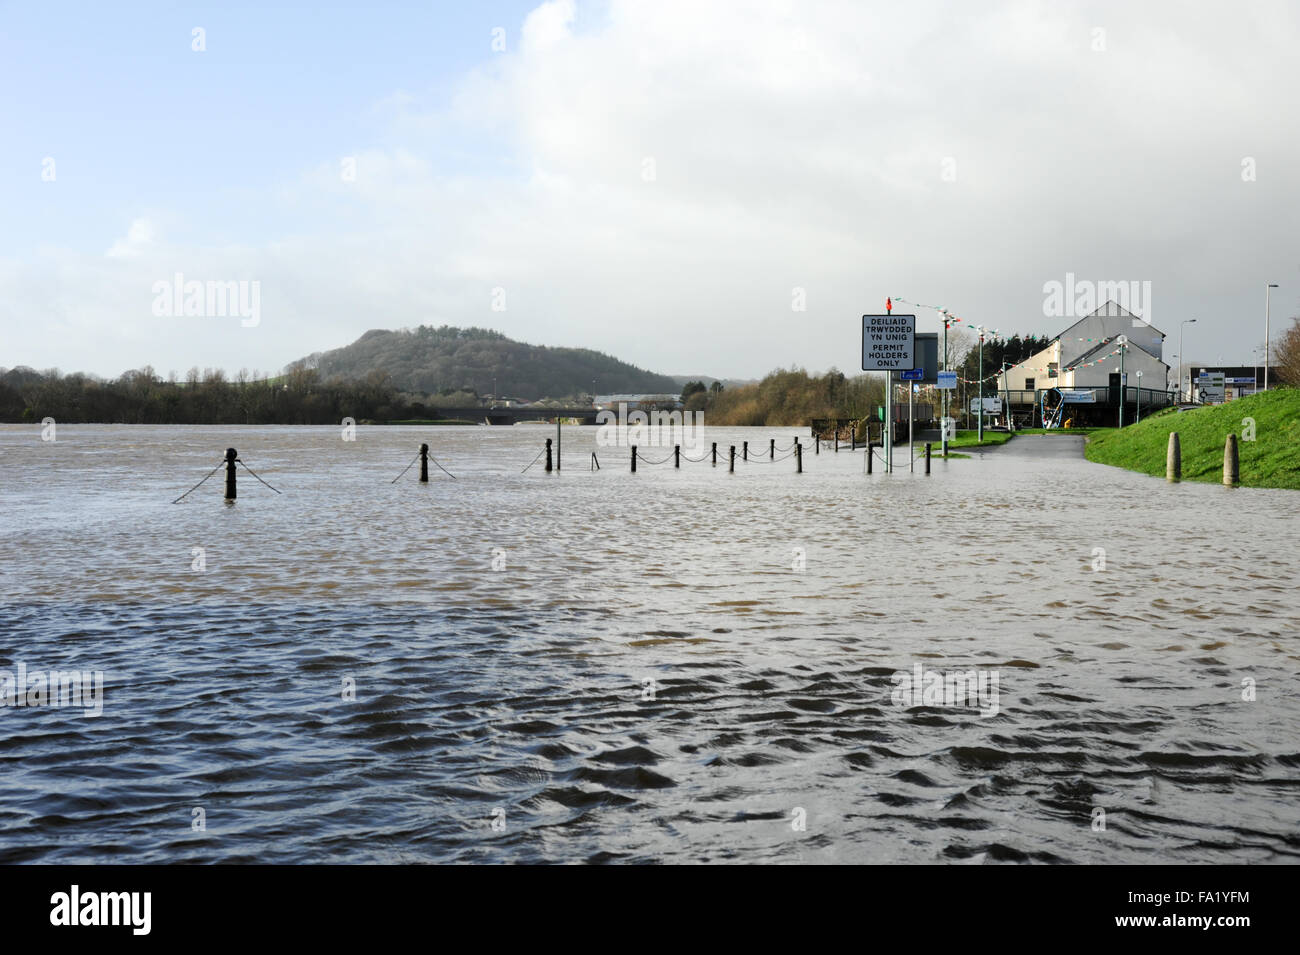 South Wales, UK, Sunday 20th December 2015. The river Towy bursts its banks on Carmarthen quayside and floods the low lying surrounding land following prolonged heavy rain during Saturday in Carmarthenshire, west Wales UK. View overlooking river Towy from The Quay. Credit:  Algis Motuza/Alamy Live News Stock Photo